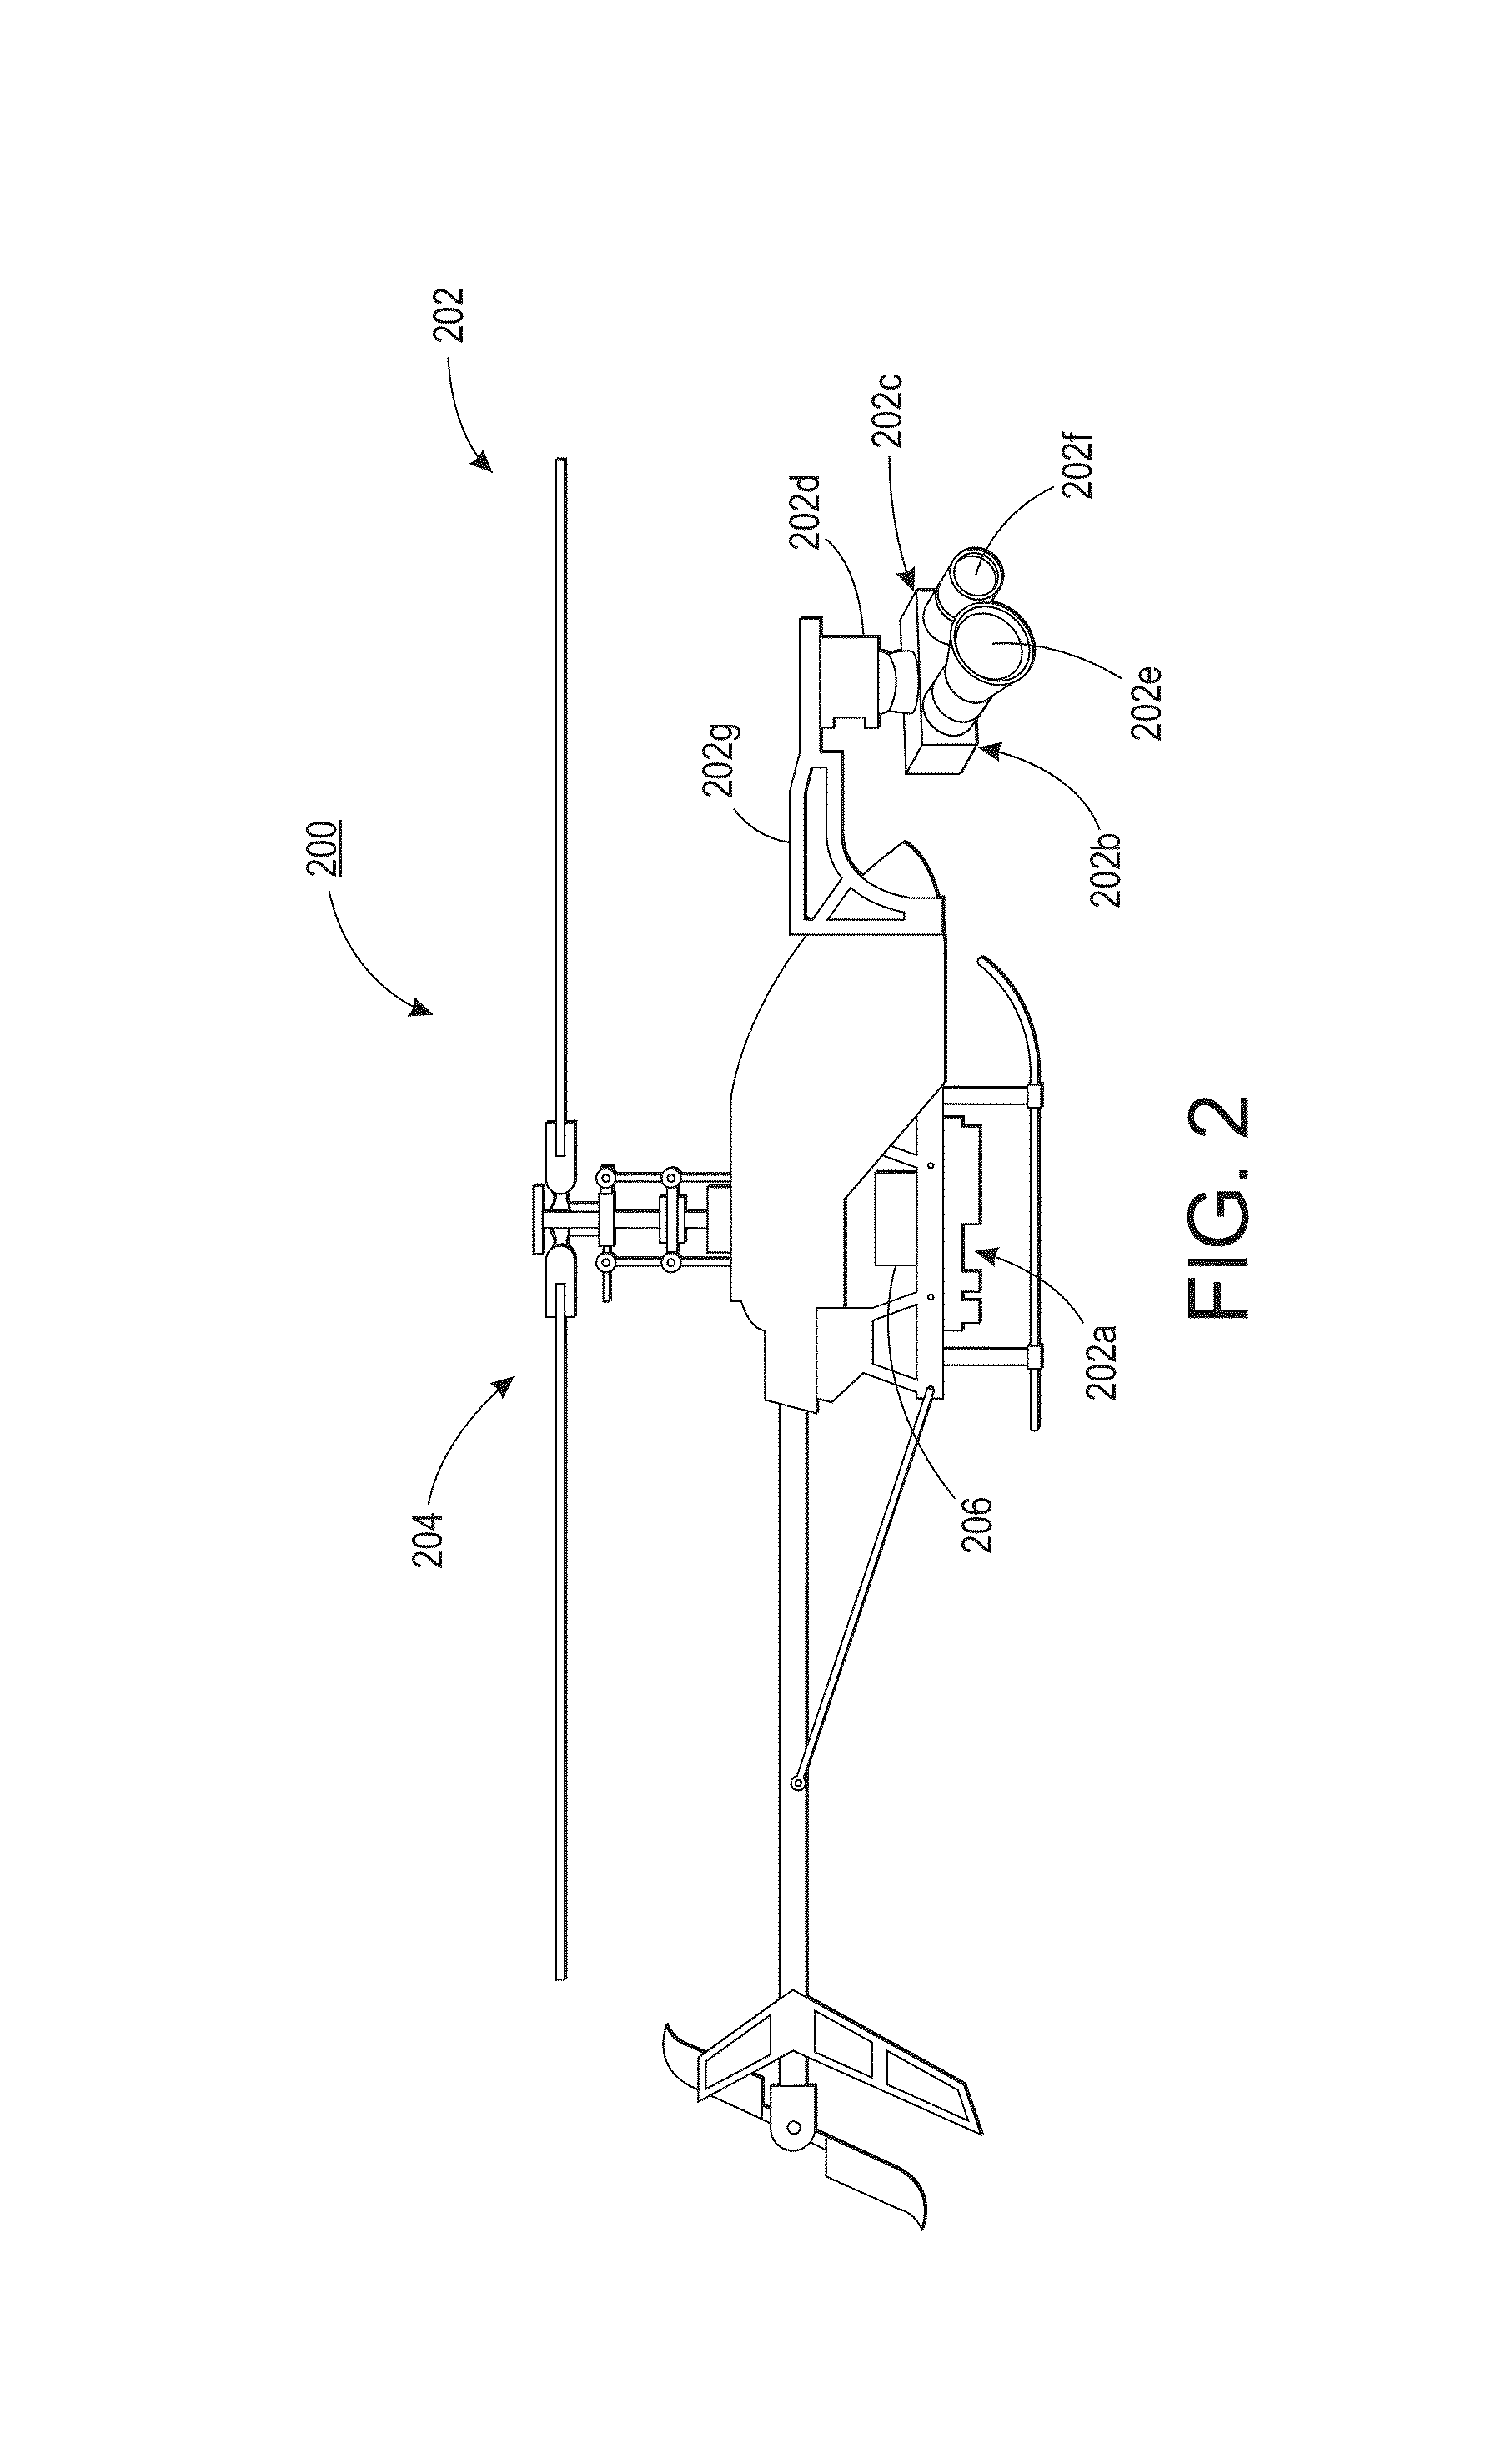 System and method for detecting, tracking and estimating the speed of vehicles from a mobile platform